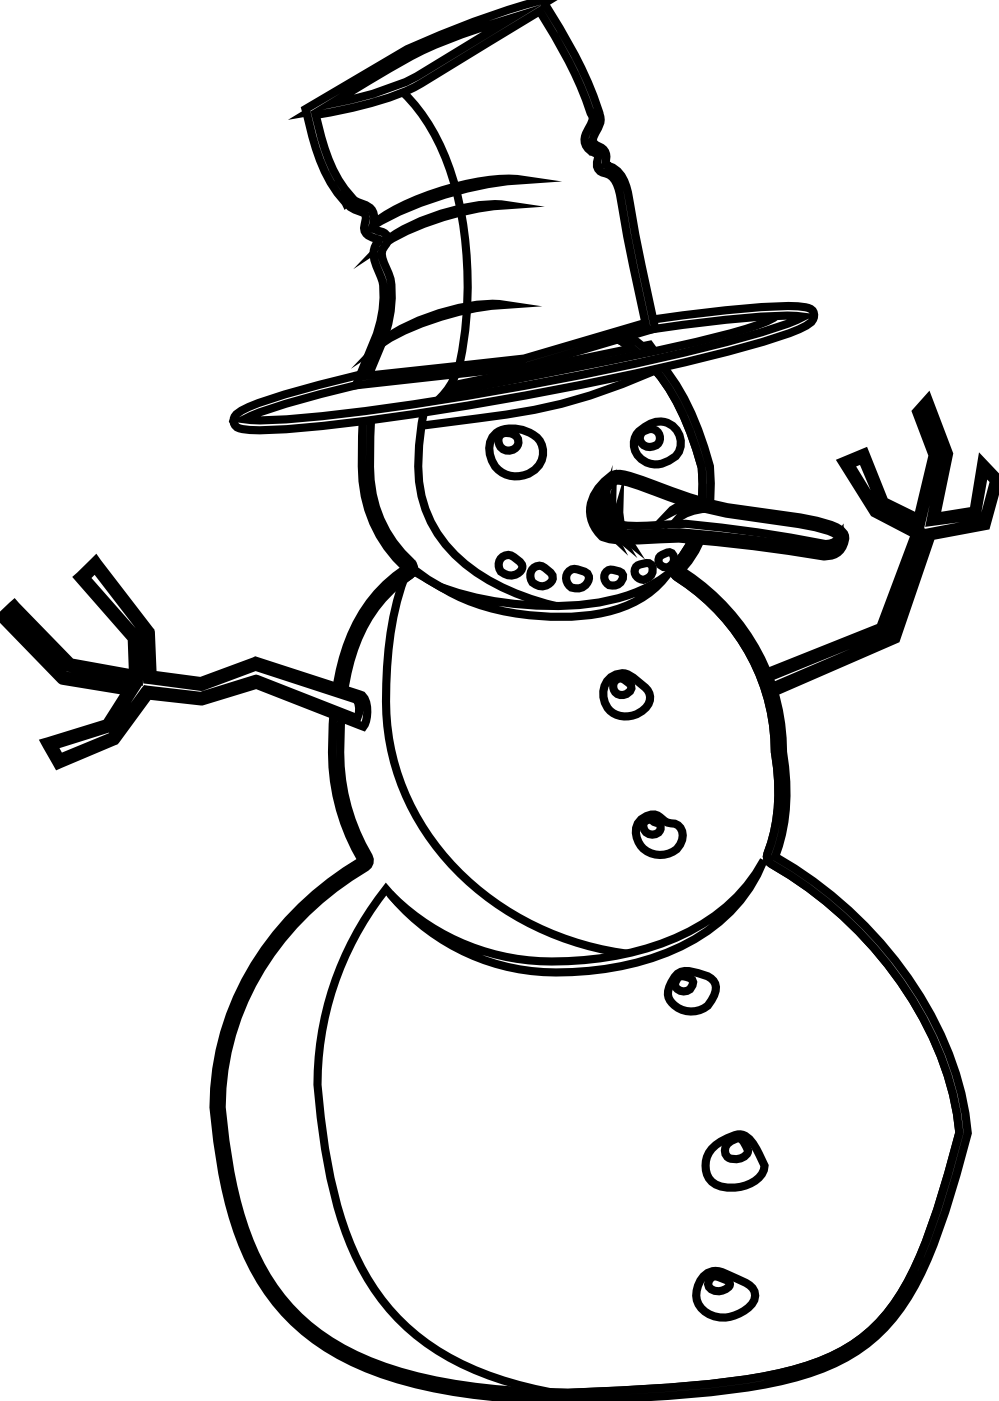 Free Olaf Clipart Black And White Download Free Clip Art Free Clip Art On Clipart Library